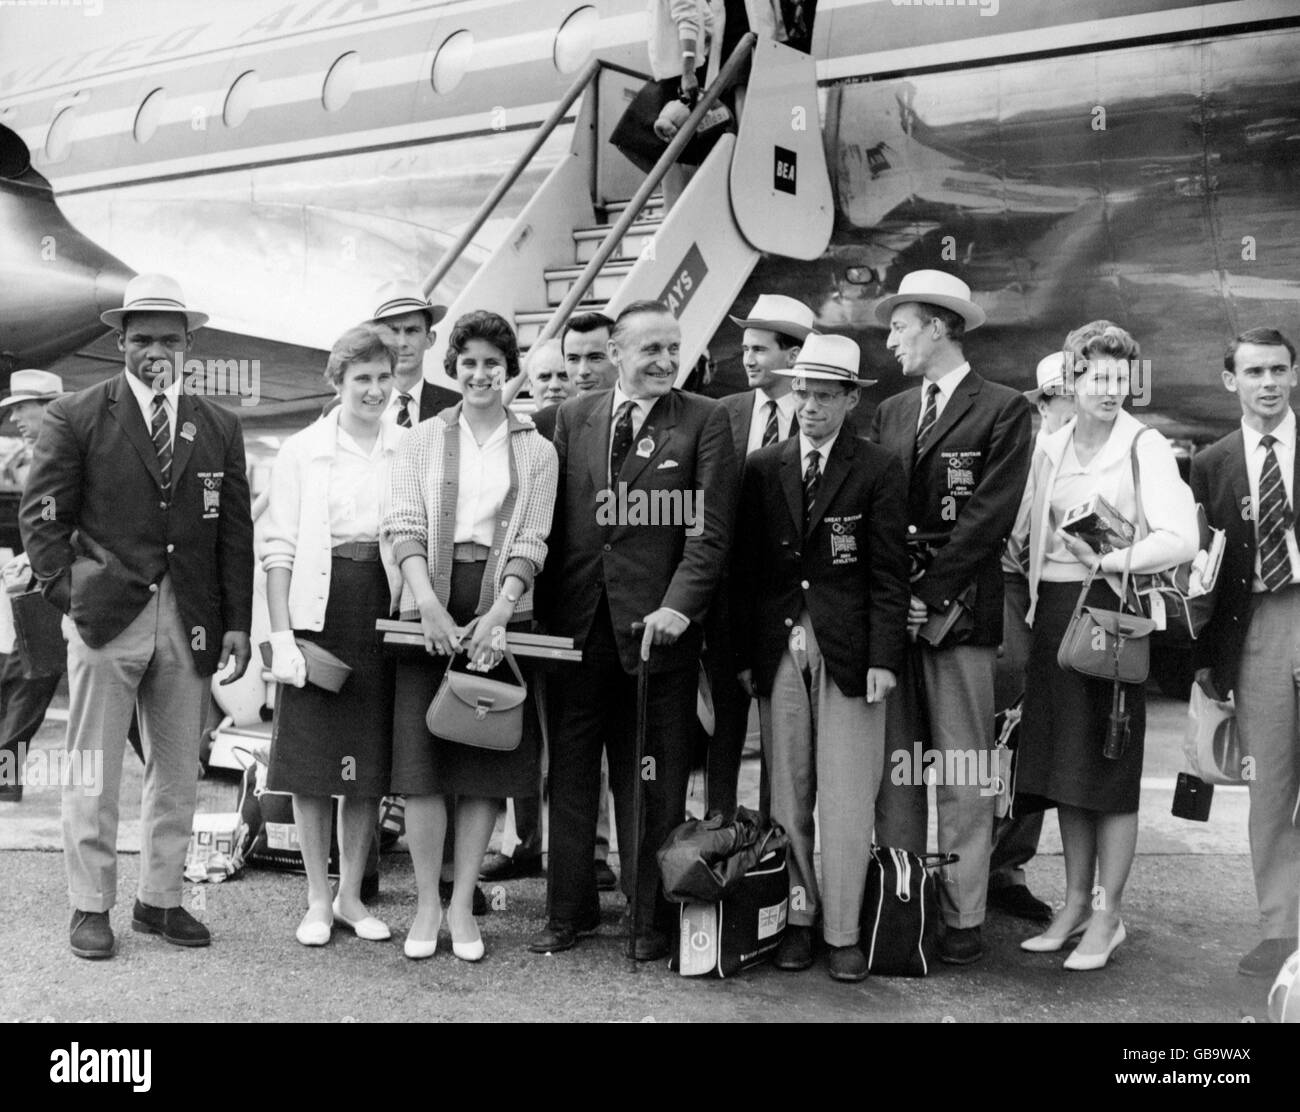 (L-R) Some of the British medallists pictured upon their arrival at London Airport: weightlifter Louis Martin (bronze), high jumper Dorothy Shirley (silver), 100m runner Dorothy Hyman (silver), Lord Burghley, The 6th Marquis of Exeter, 50km walker Don Thompson (gold), a fencer and 80m hurdler Carol Quinton (silver) Stock Photo